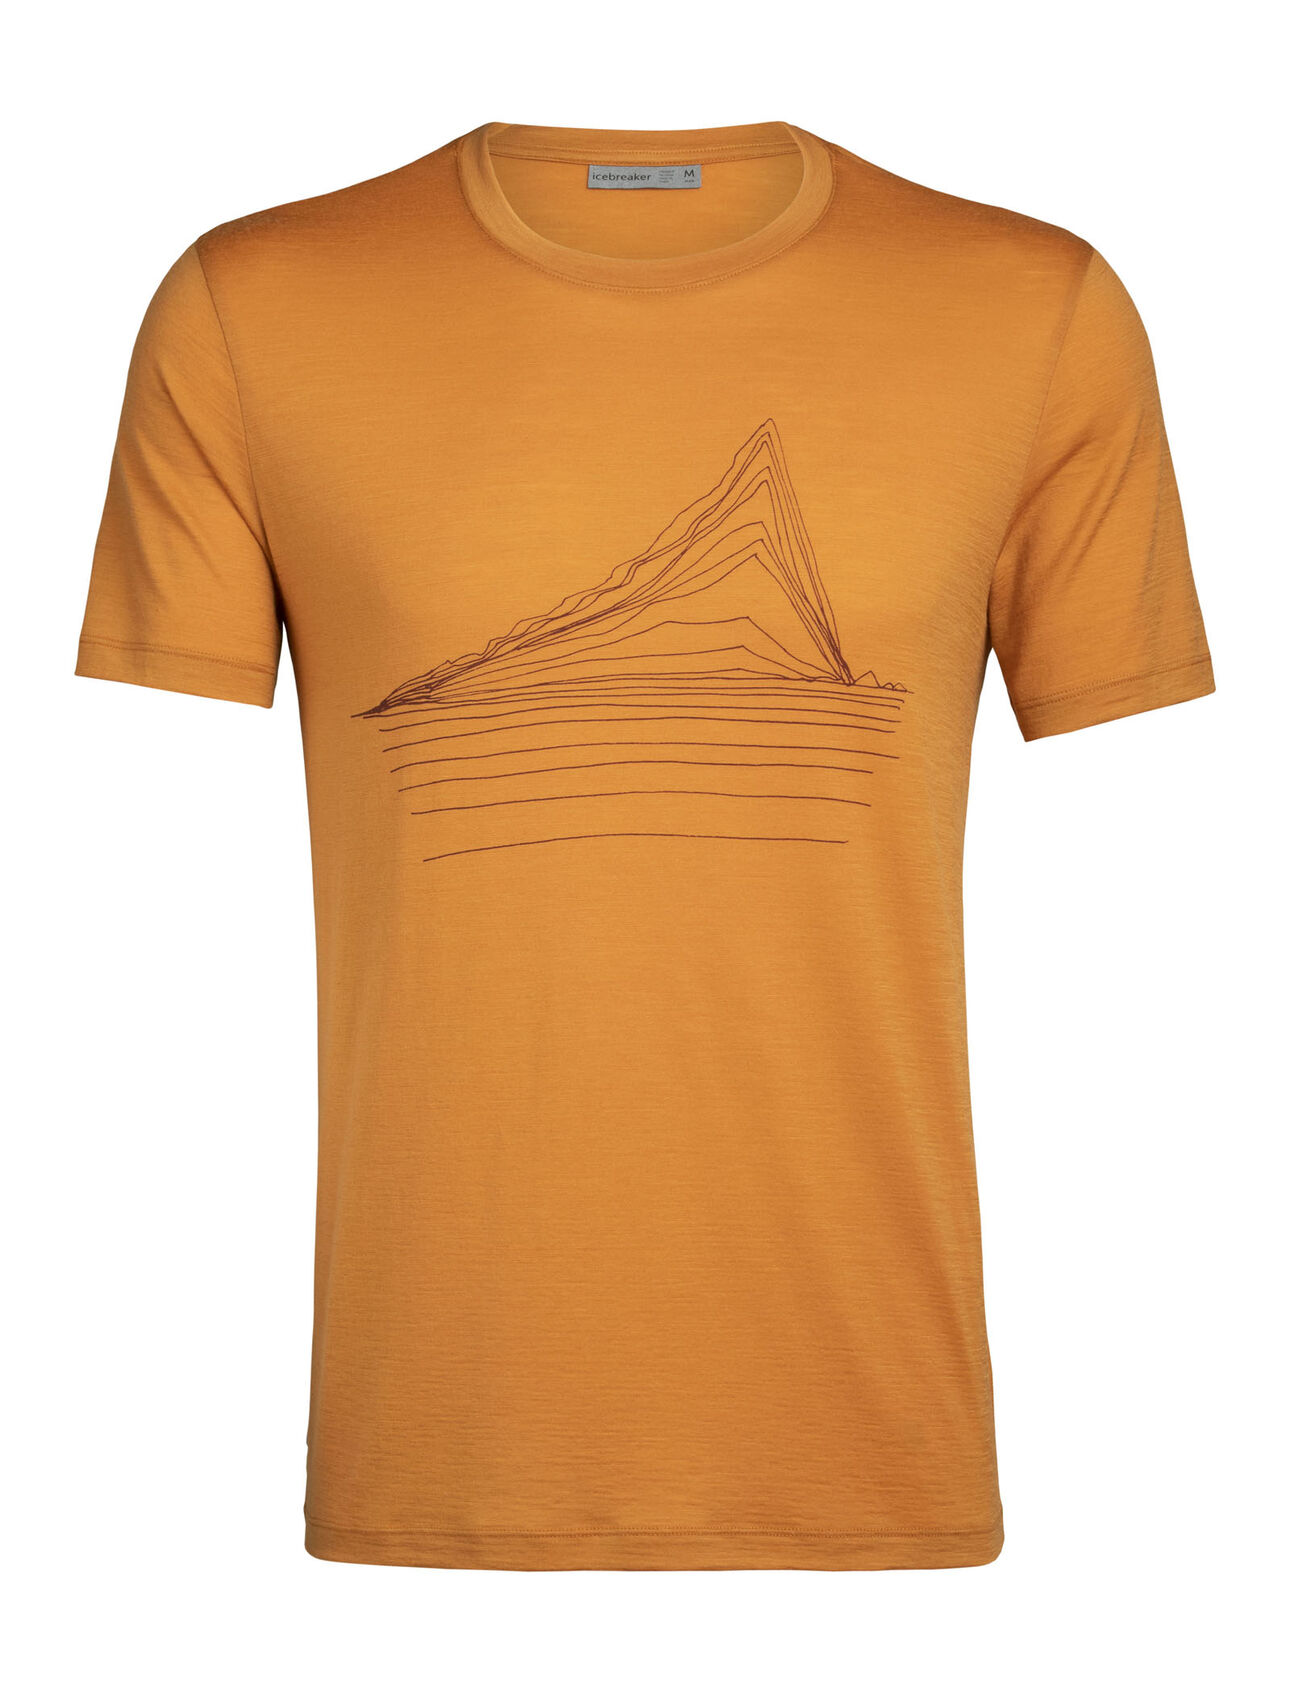 para hombre Merino Tech Lite Short Sleeve Crewe T-Shirt Heating Up Our most versatile tech tee, in breathable, odor-resistant merino wool with a slight stretch. Artist William Carden-Horton creates a striking image of glacial sea ice in his iconic line-drawing style.